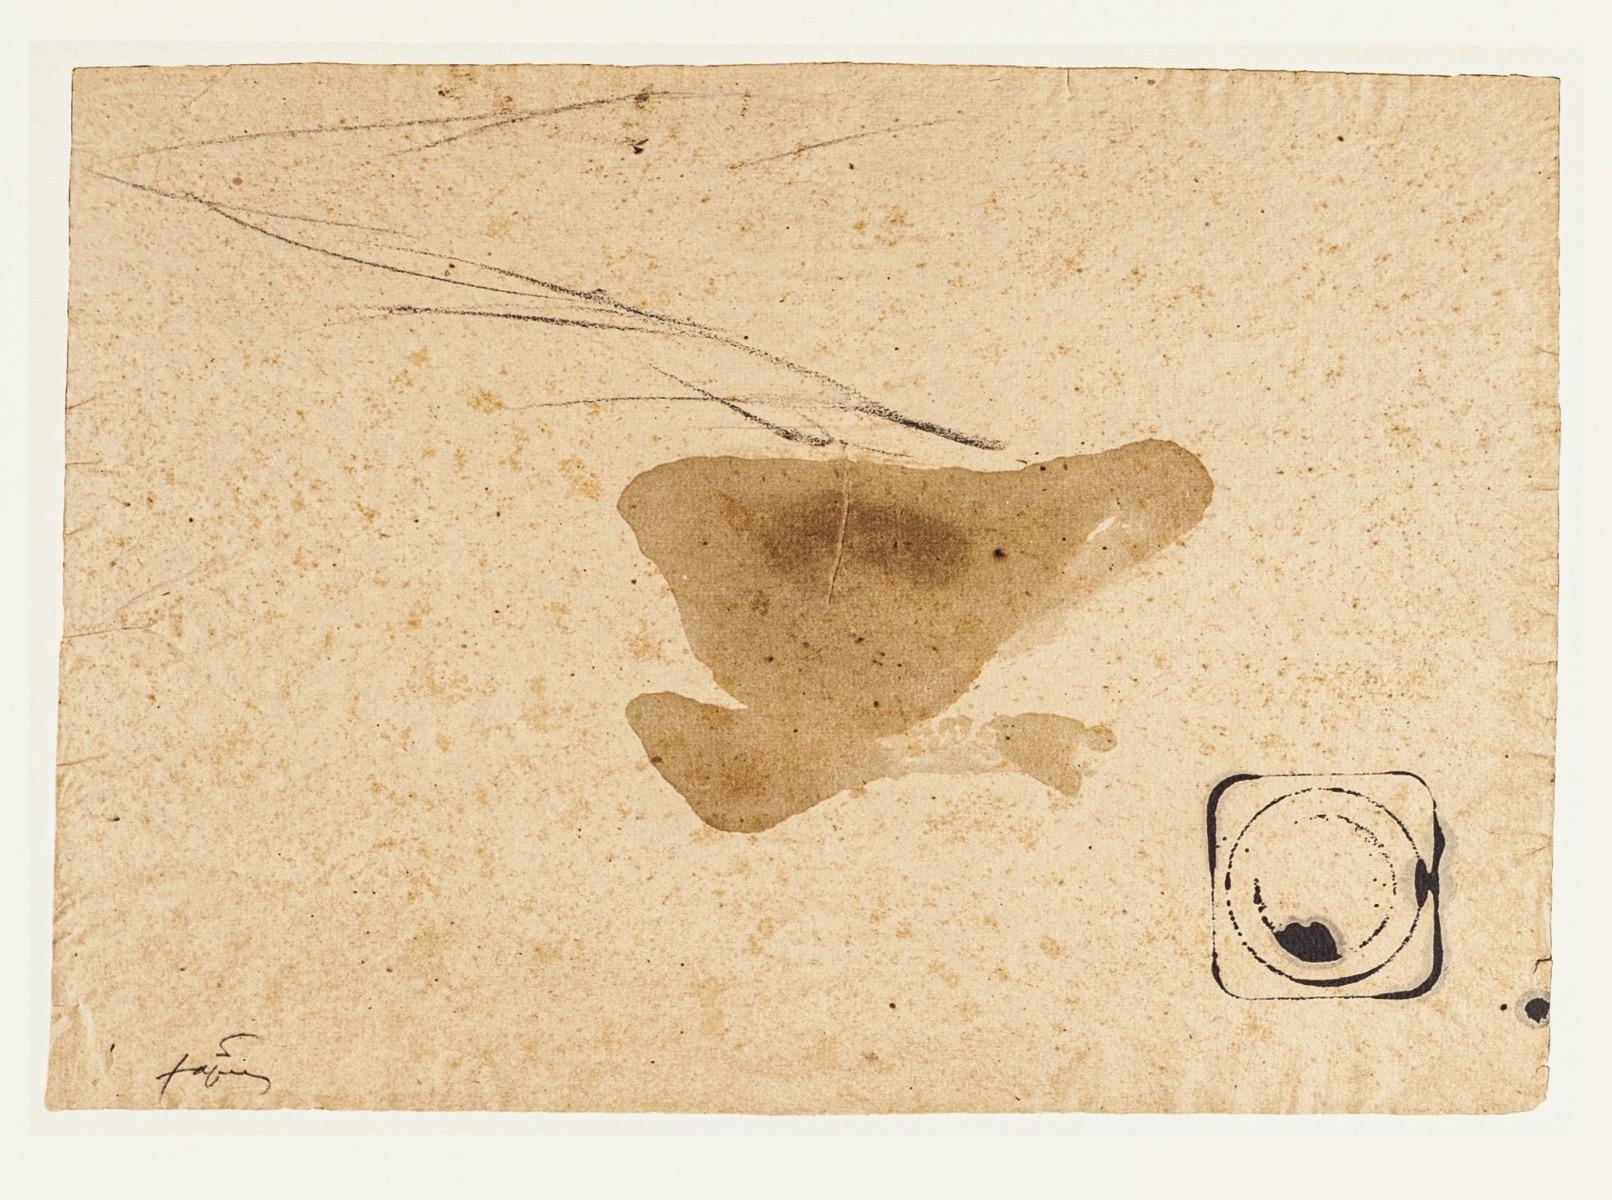 Antoni Tàpies (after) Abstract Print - Cup and Box of Tea - Vintage Offset Print After Antoni Tàpies - 1982